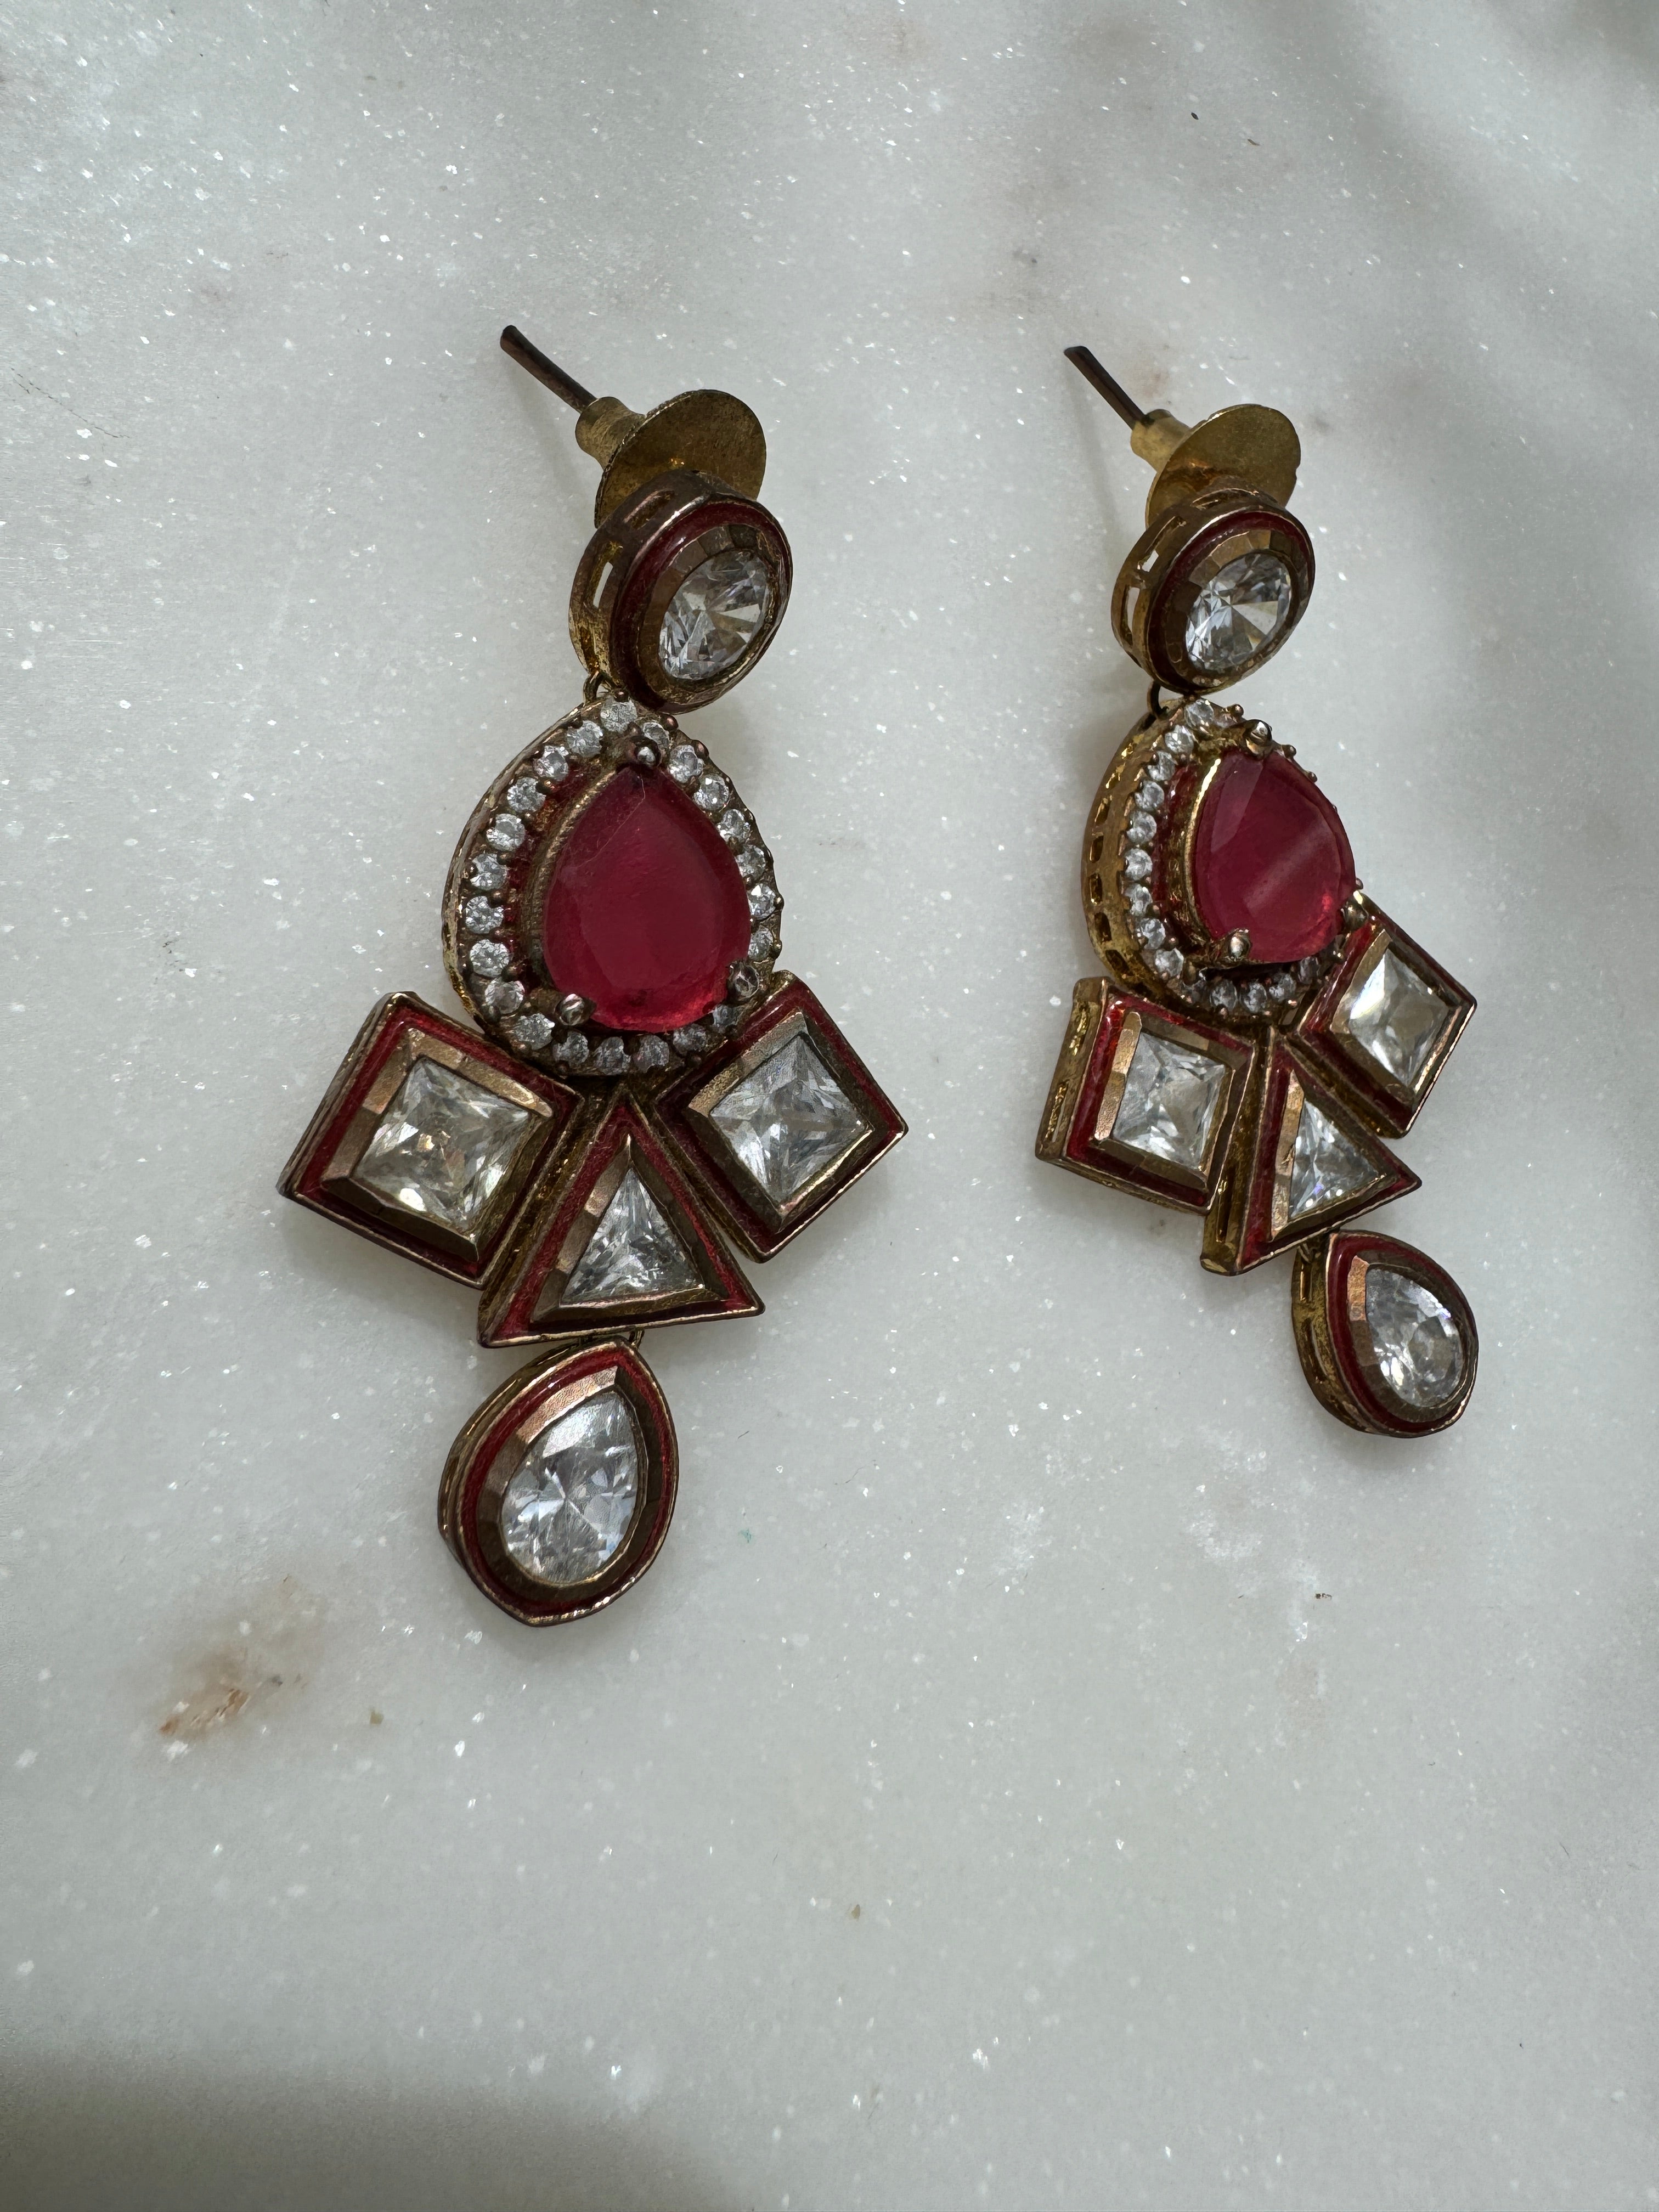 Future Nomads Earrings Red Agate & Crystal Earrings Gold Plated